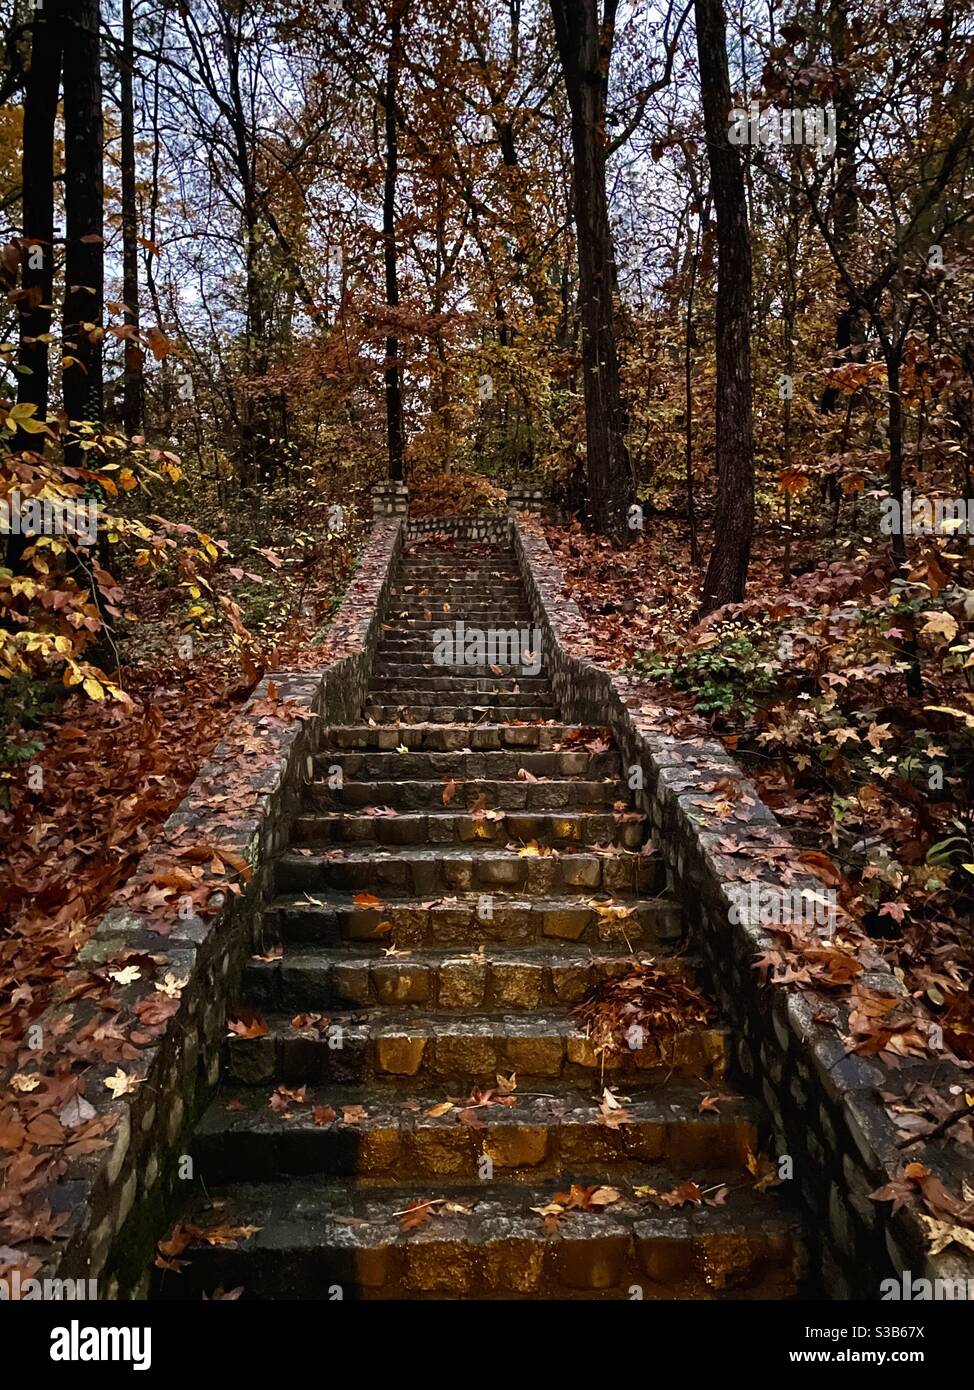 A stone staircase rises through dark woods in the fall with colorful leaves on the ground. Stock Photo